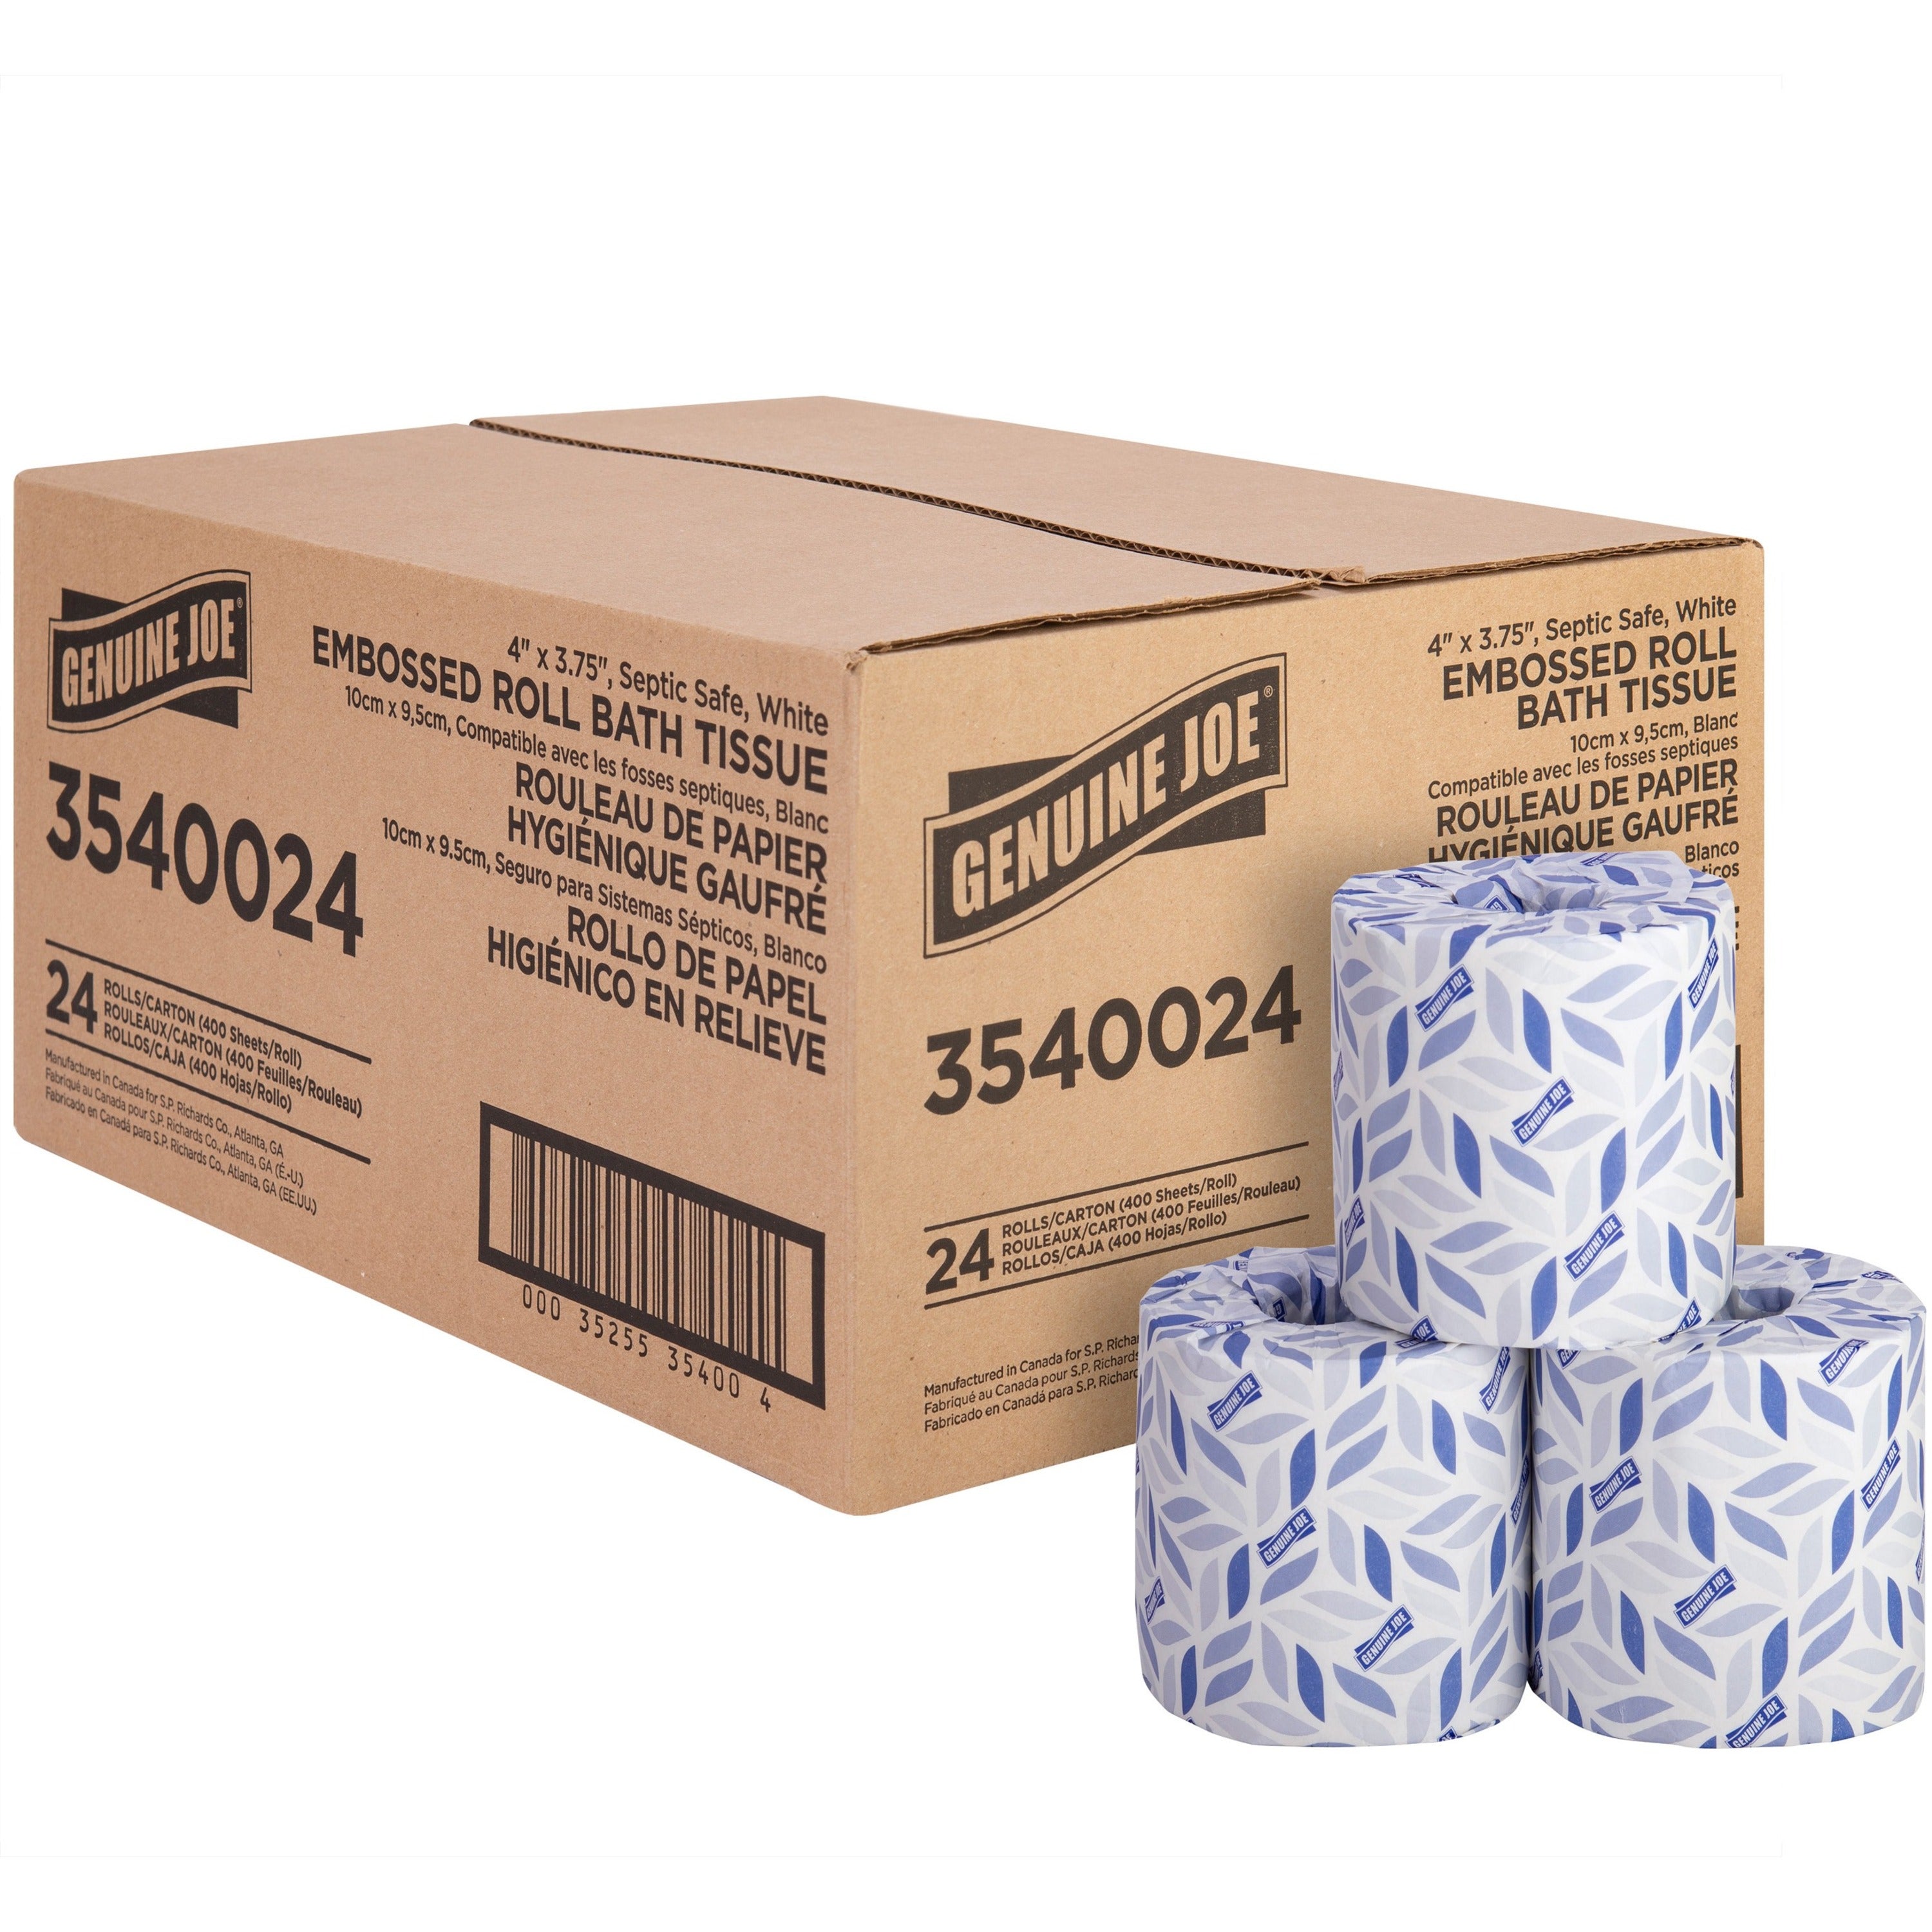 genuine-joe-2-ply-bath-tissue-rolls-2-ply-4-x-375-400-sheets-roll-white-perforated-absorbent-soft-sewer-safe-septic-safe-for-bathroom-restroom-24-carton_gjo3540024 - 1